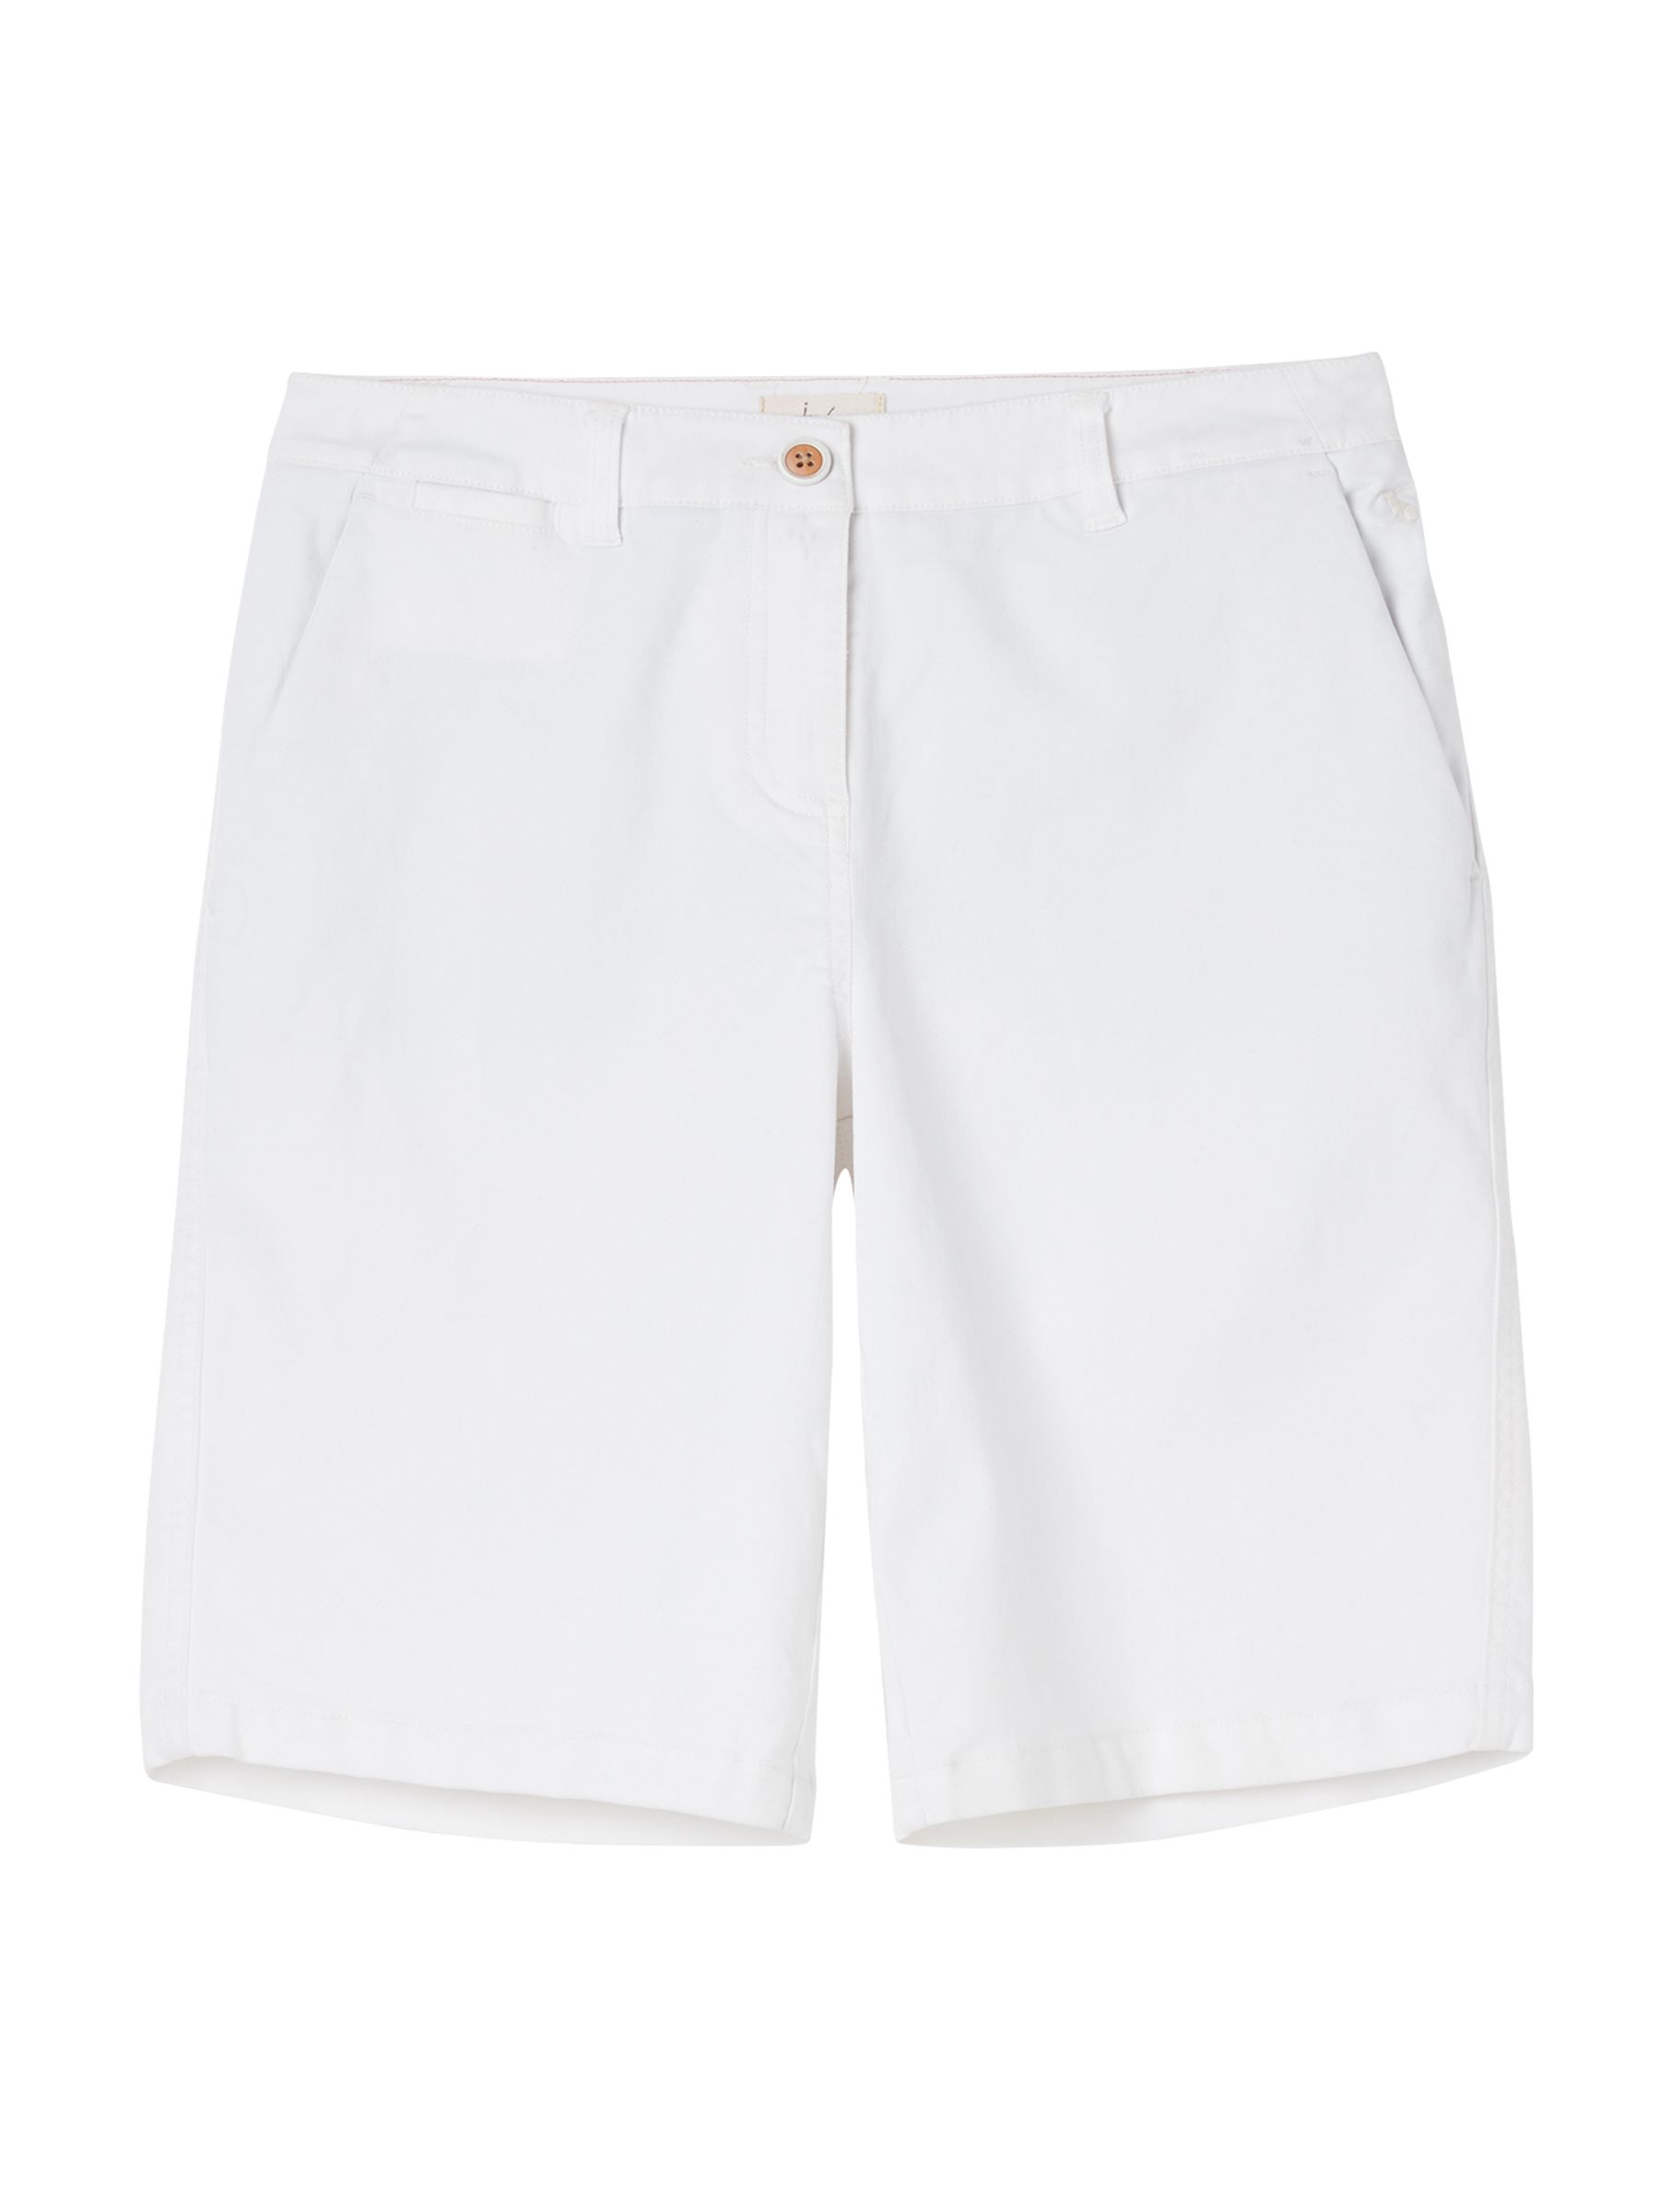 Buy Cruise Long White Chino Shorts from the Joules online shop